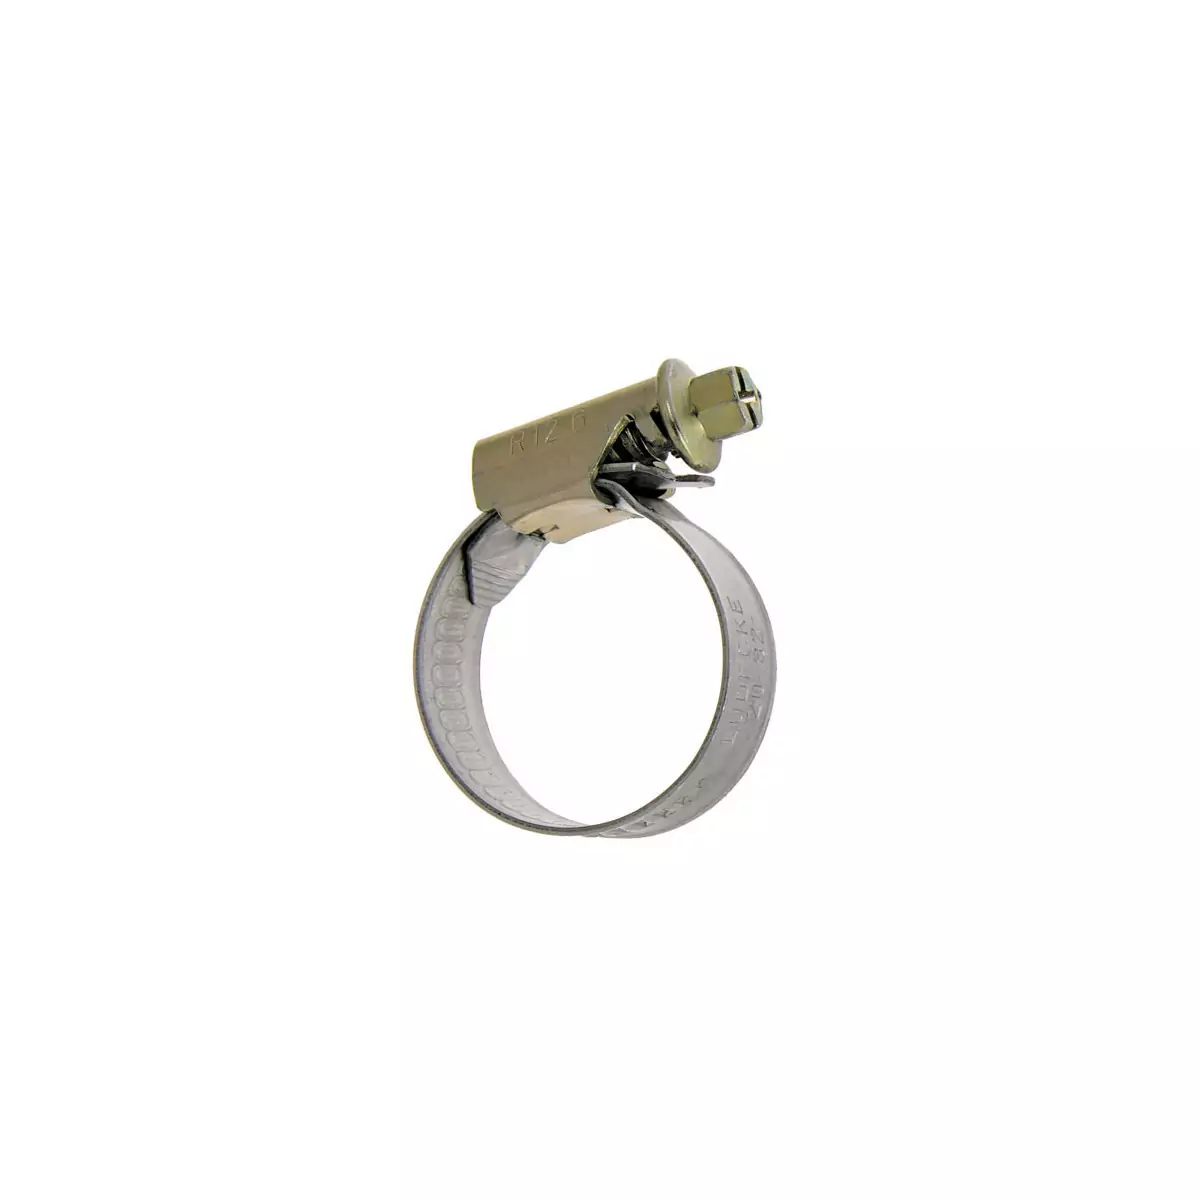 Zinc plated steel clamp, yellow chrome with hexagonal slotted screw